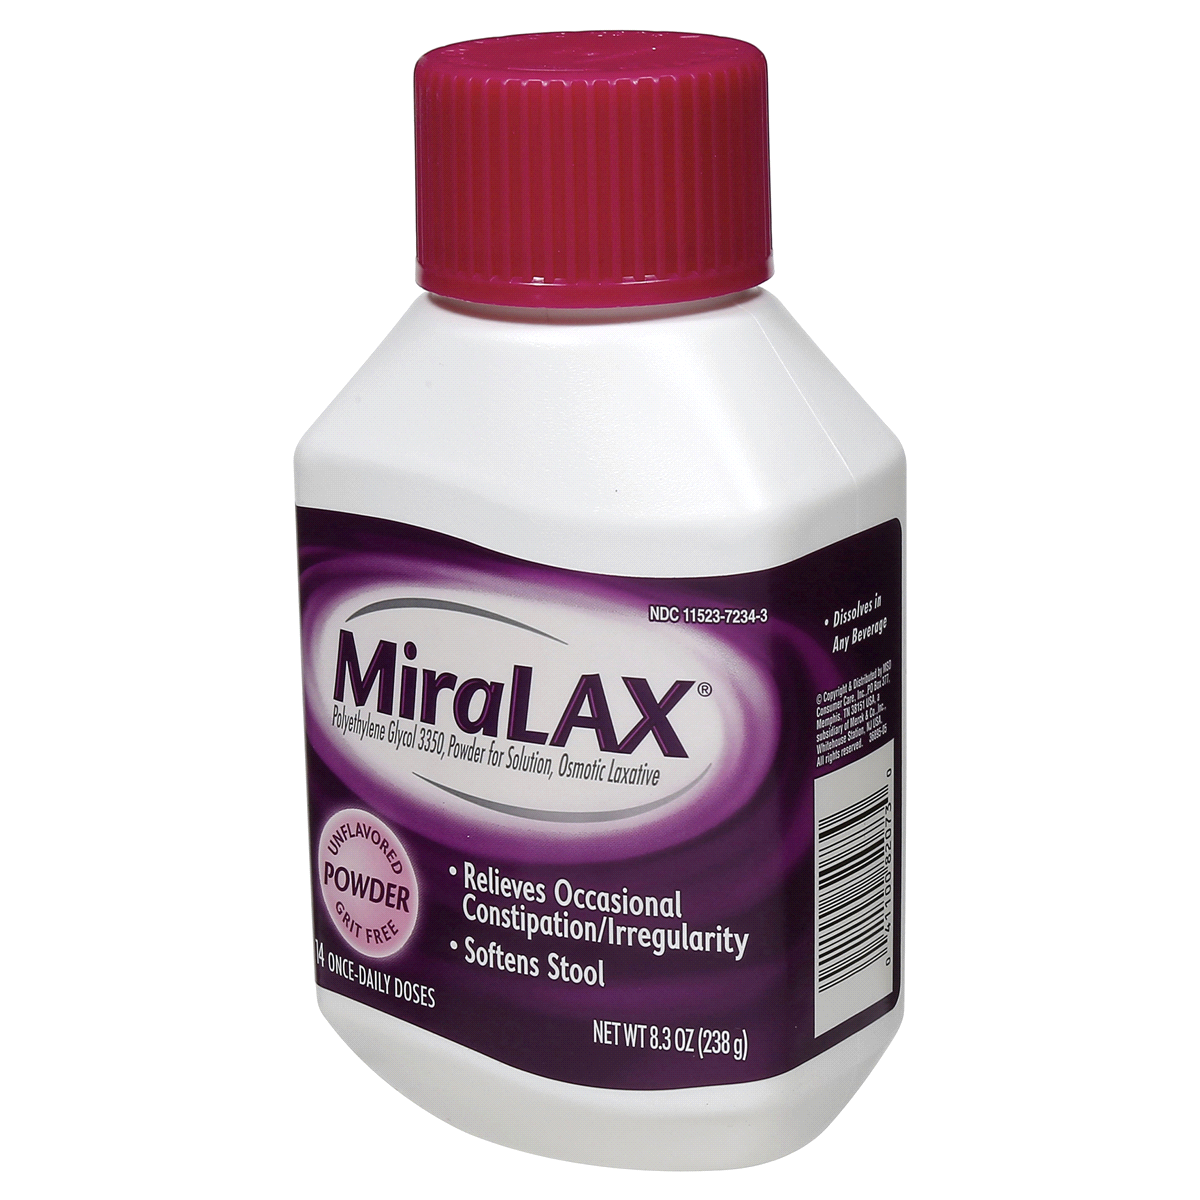 slide 30 of 37, Miralax Powder Osmotic Unflavored Laxative 8.3 oz Bottle, 